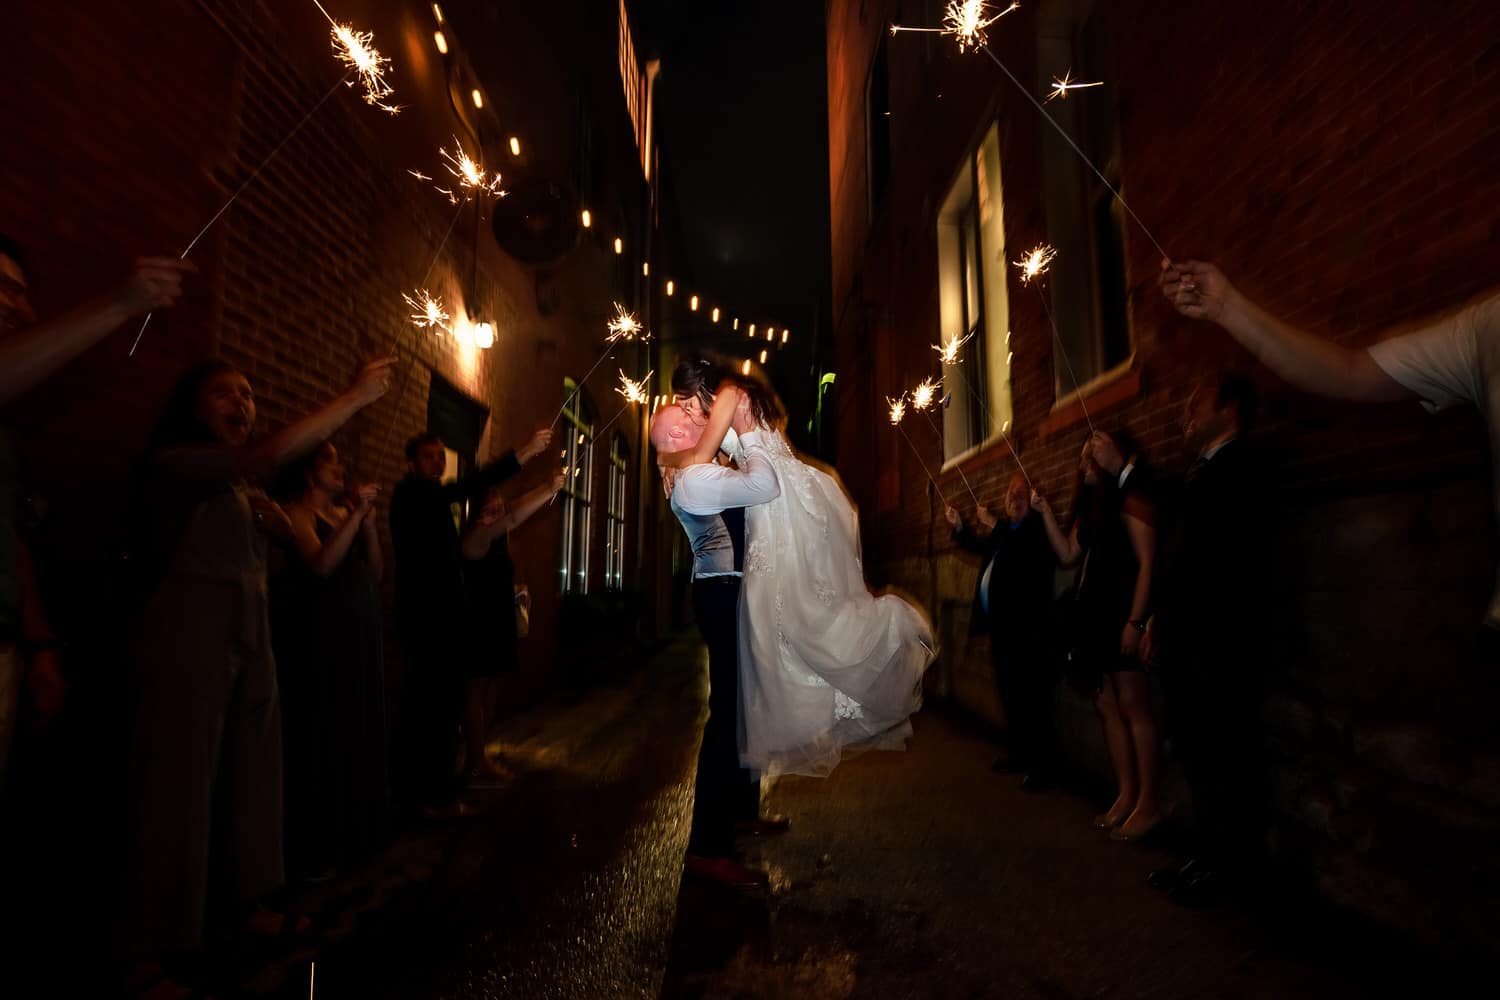 A candid picture of a groom lifting his bride into the air as family and friends wave sparklers around them during their wedding reception sparkler exit. 